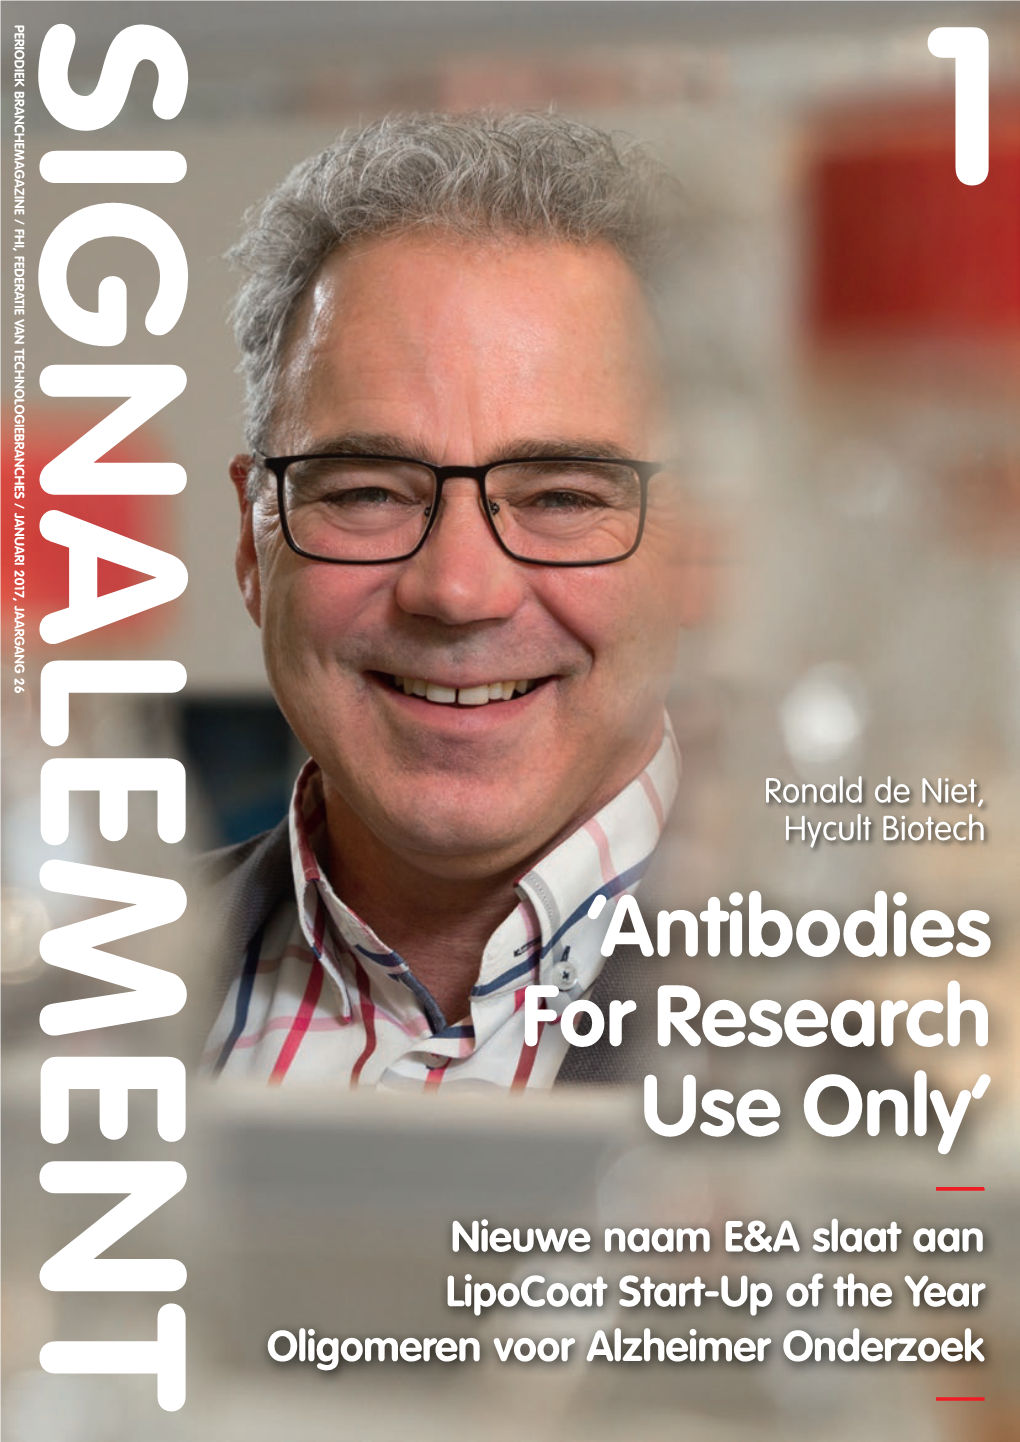 'Antibodies for Research Use Only'